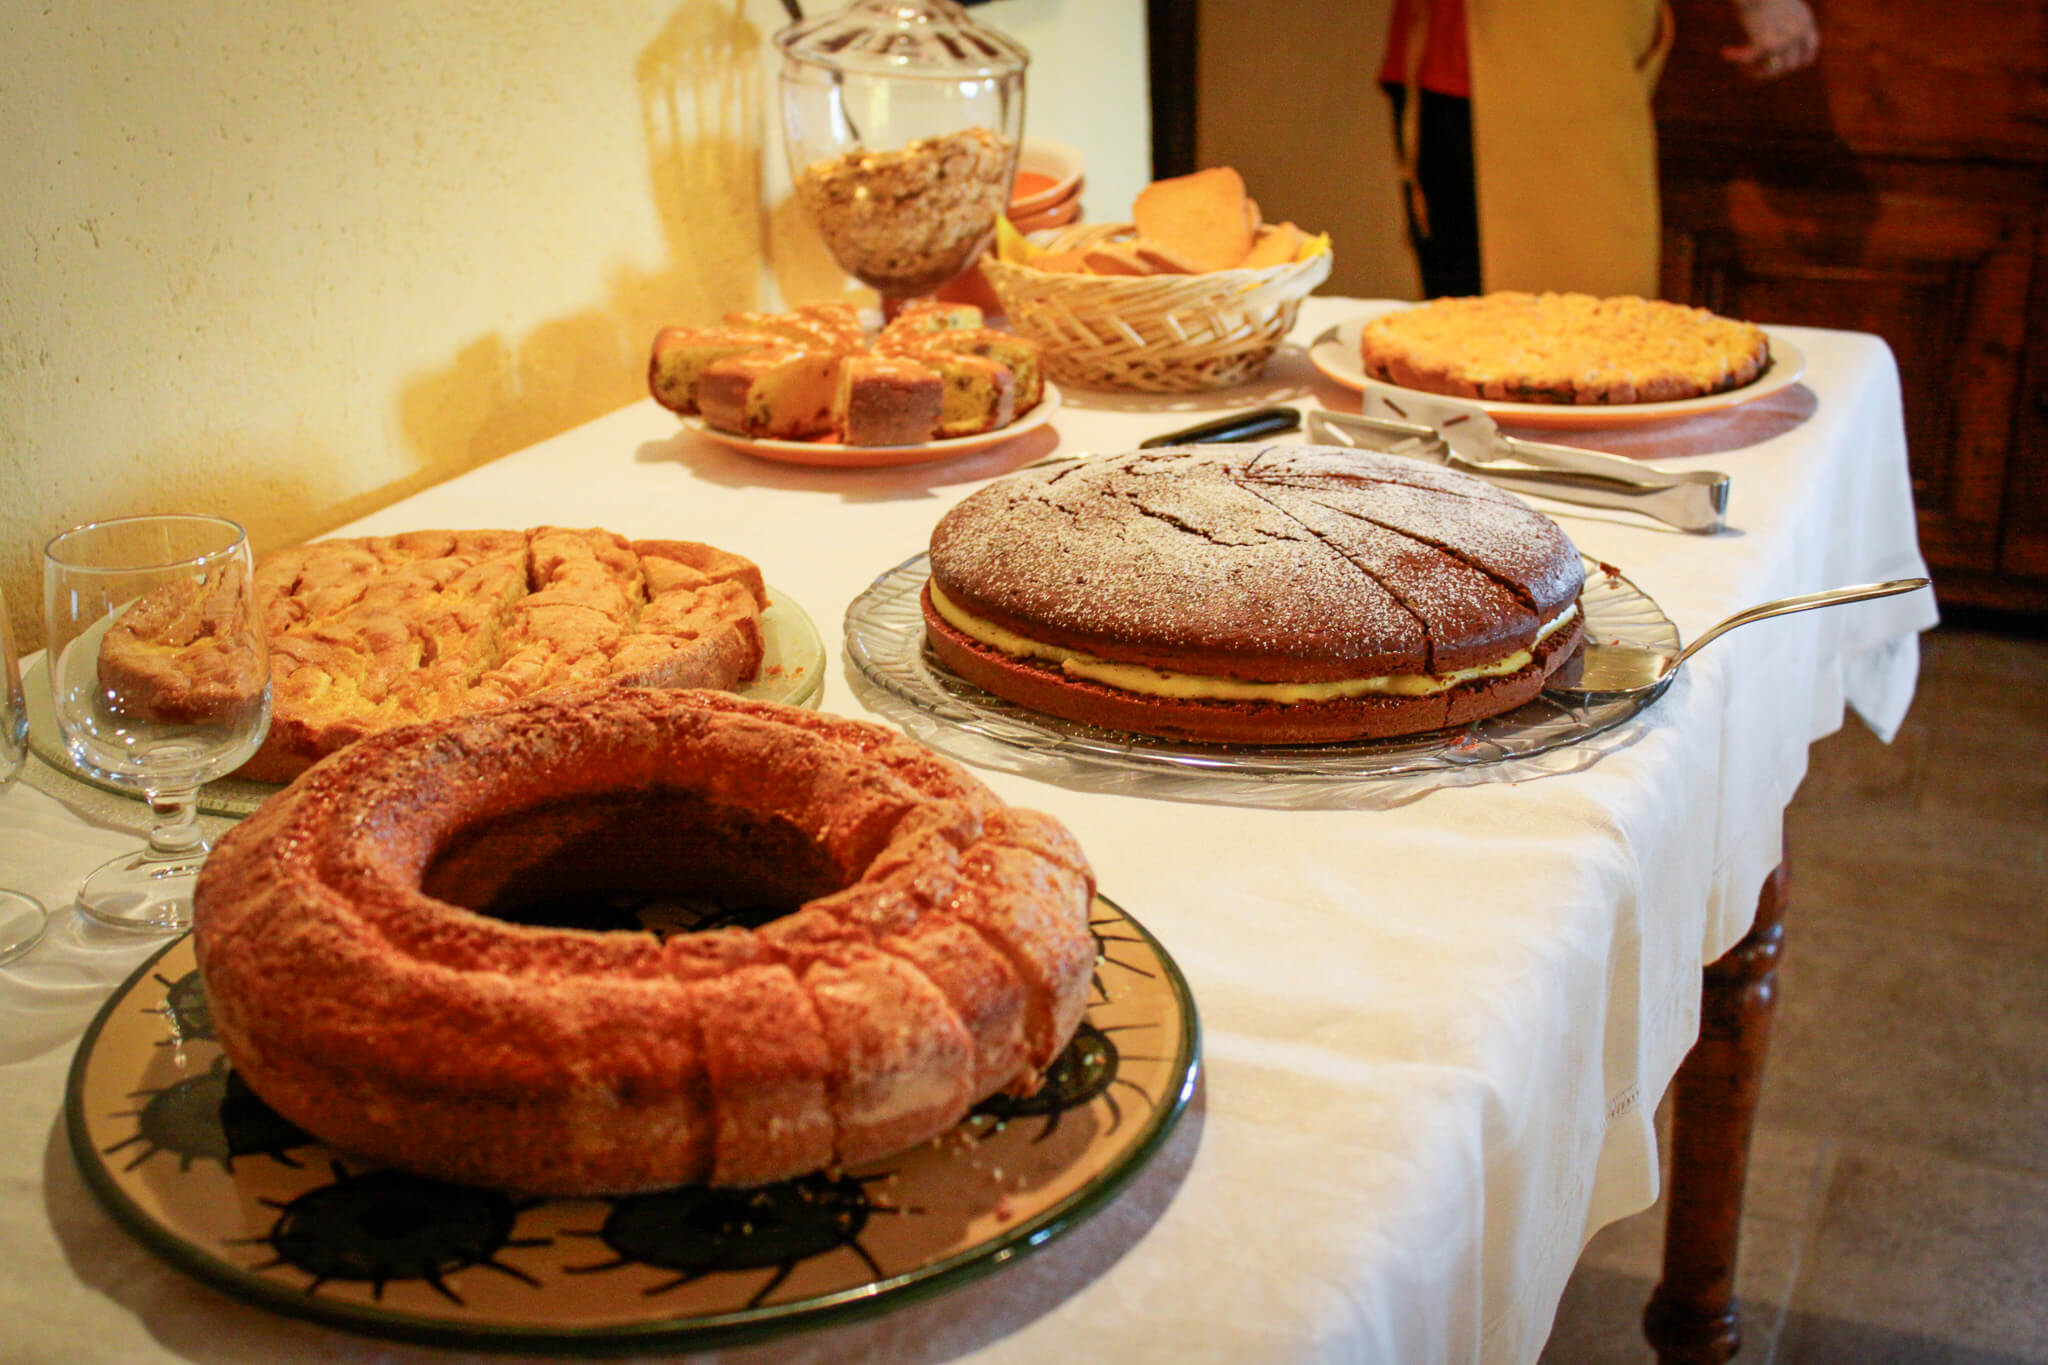 A delicious spread of cakes for breakfast at our agriturismo in Le Marche, Italy